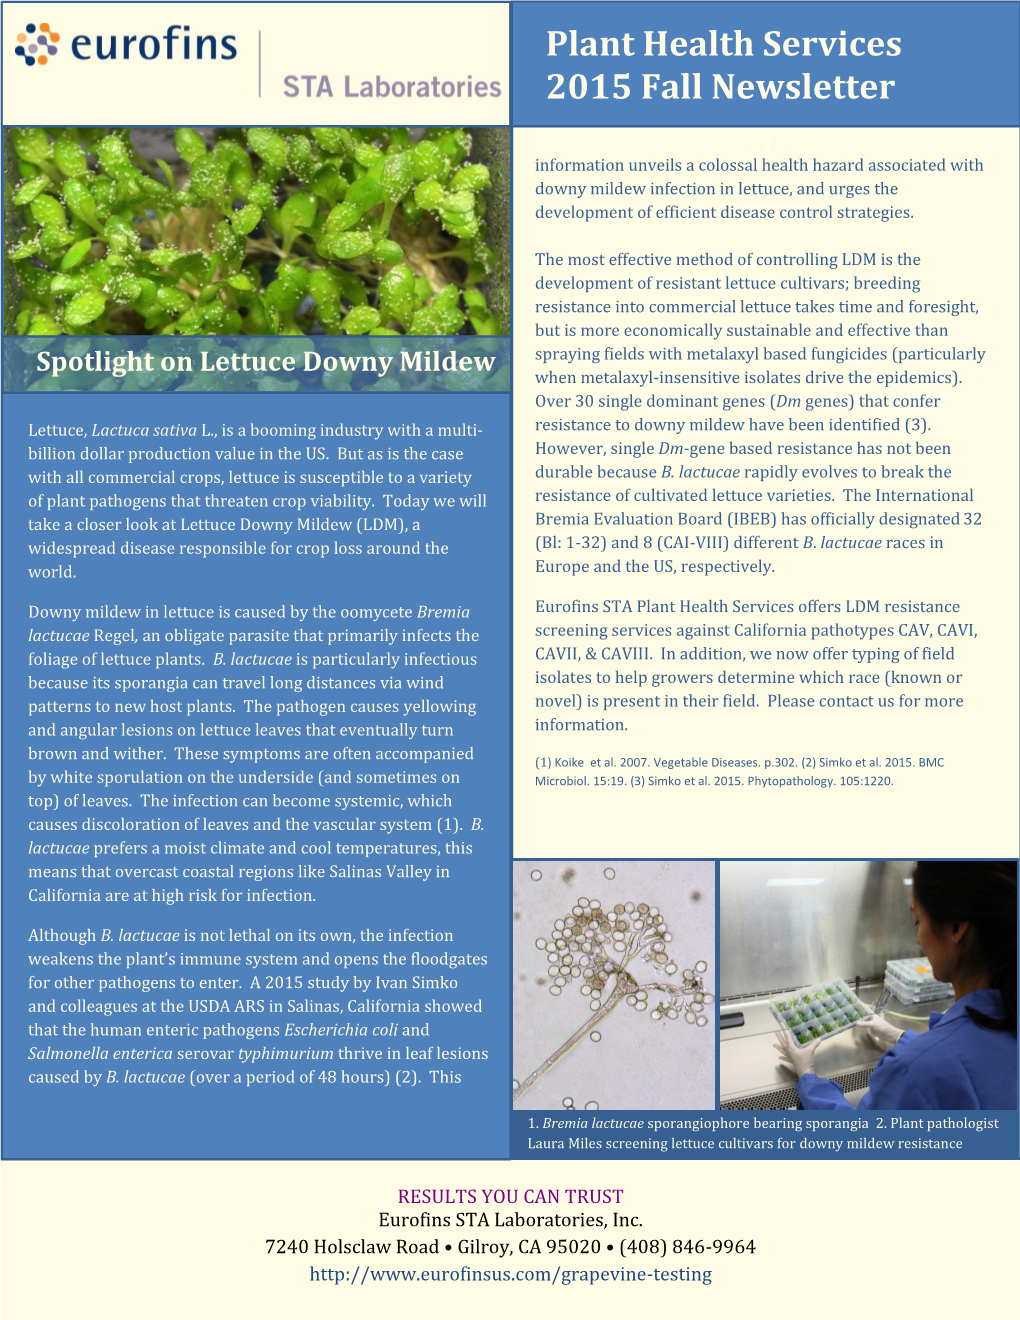 Spotlight on Lettuce Downy Mildew Spraying Fields with Metalaxyl Based Fungicides (Particularly When Metalaxyl-Insensitive Isolates Drive the Epidemics)